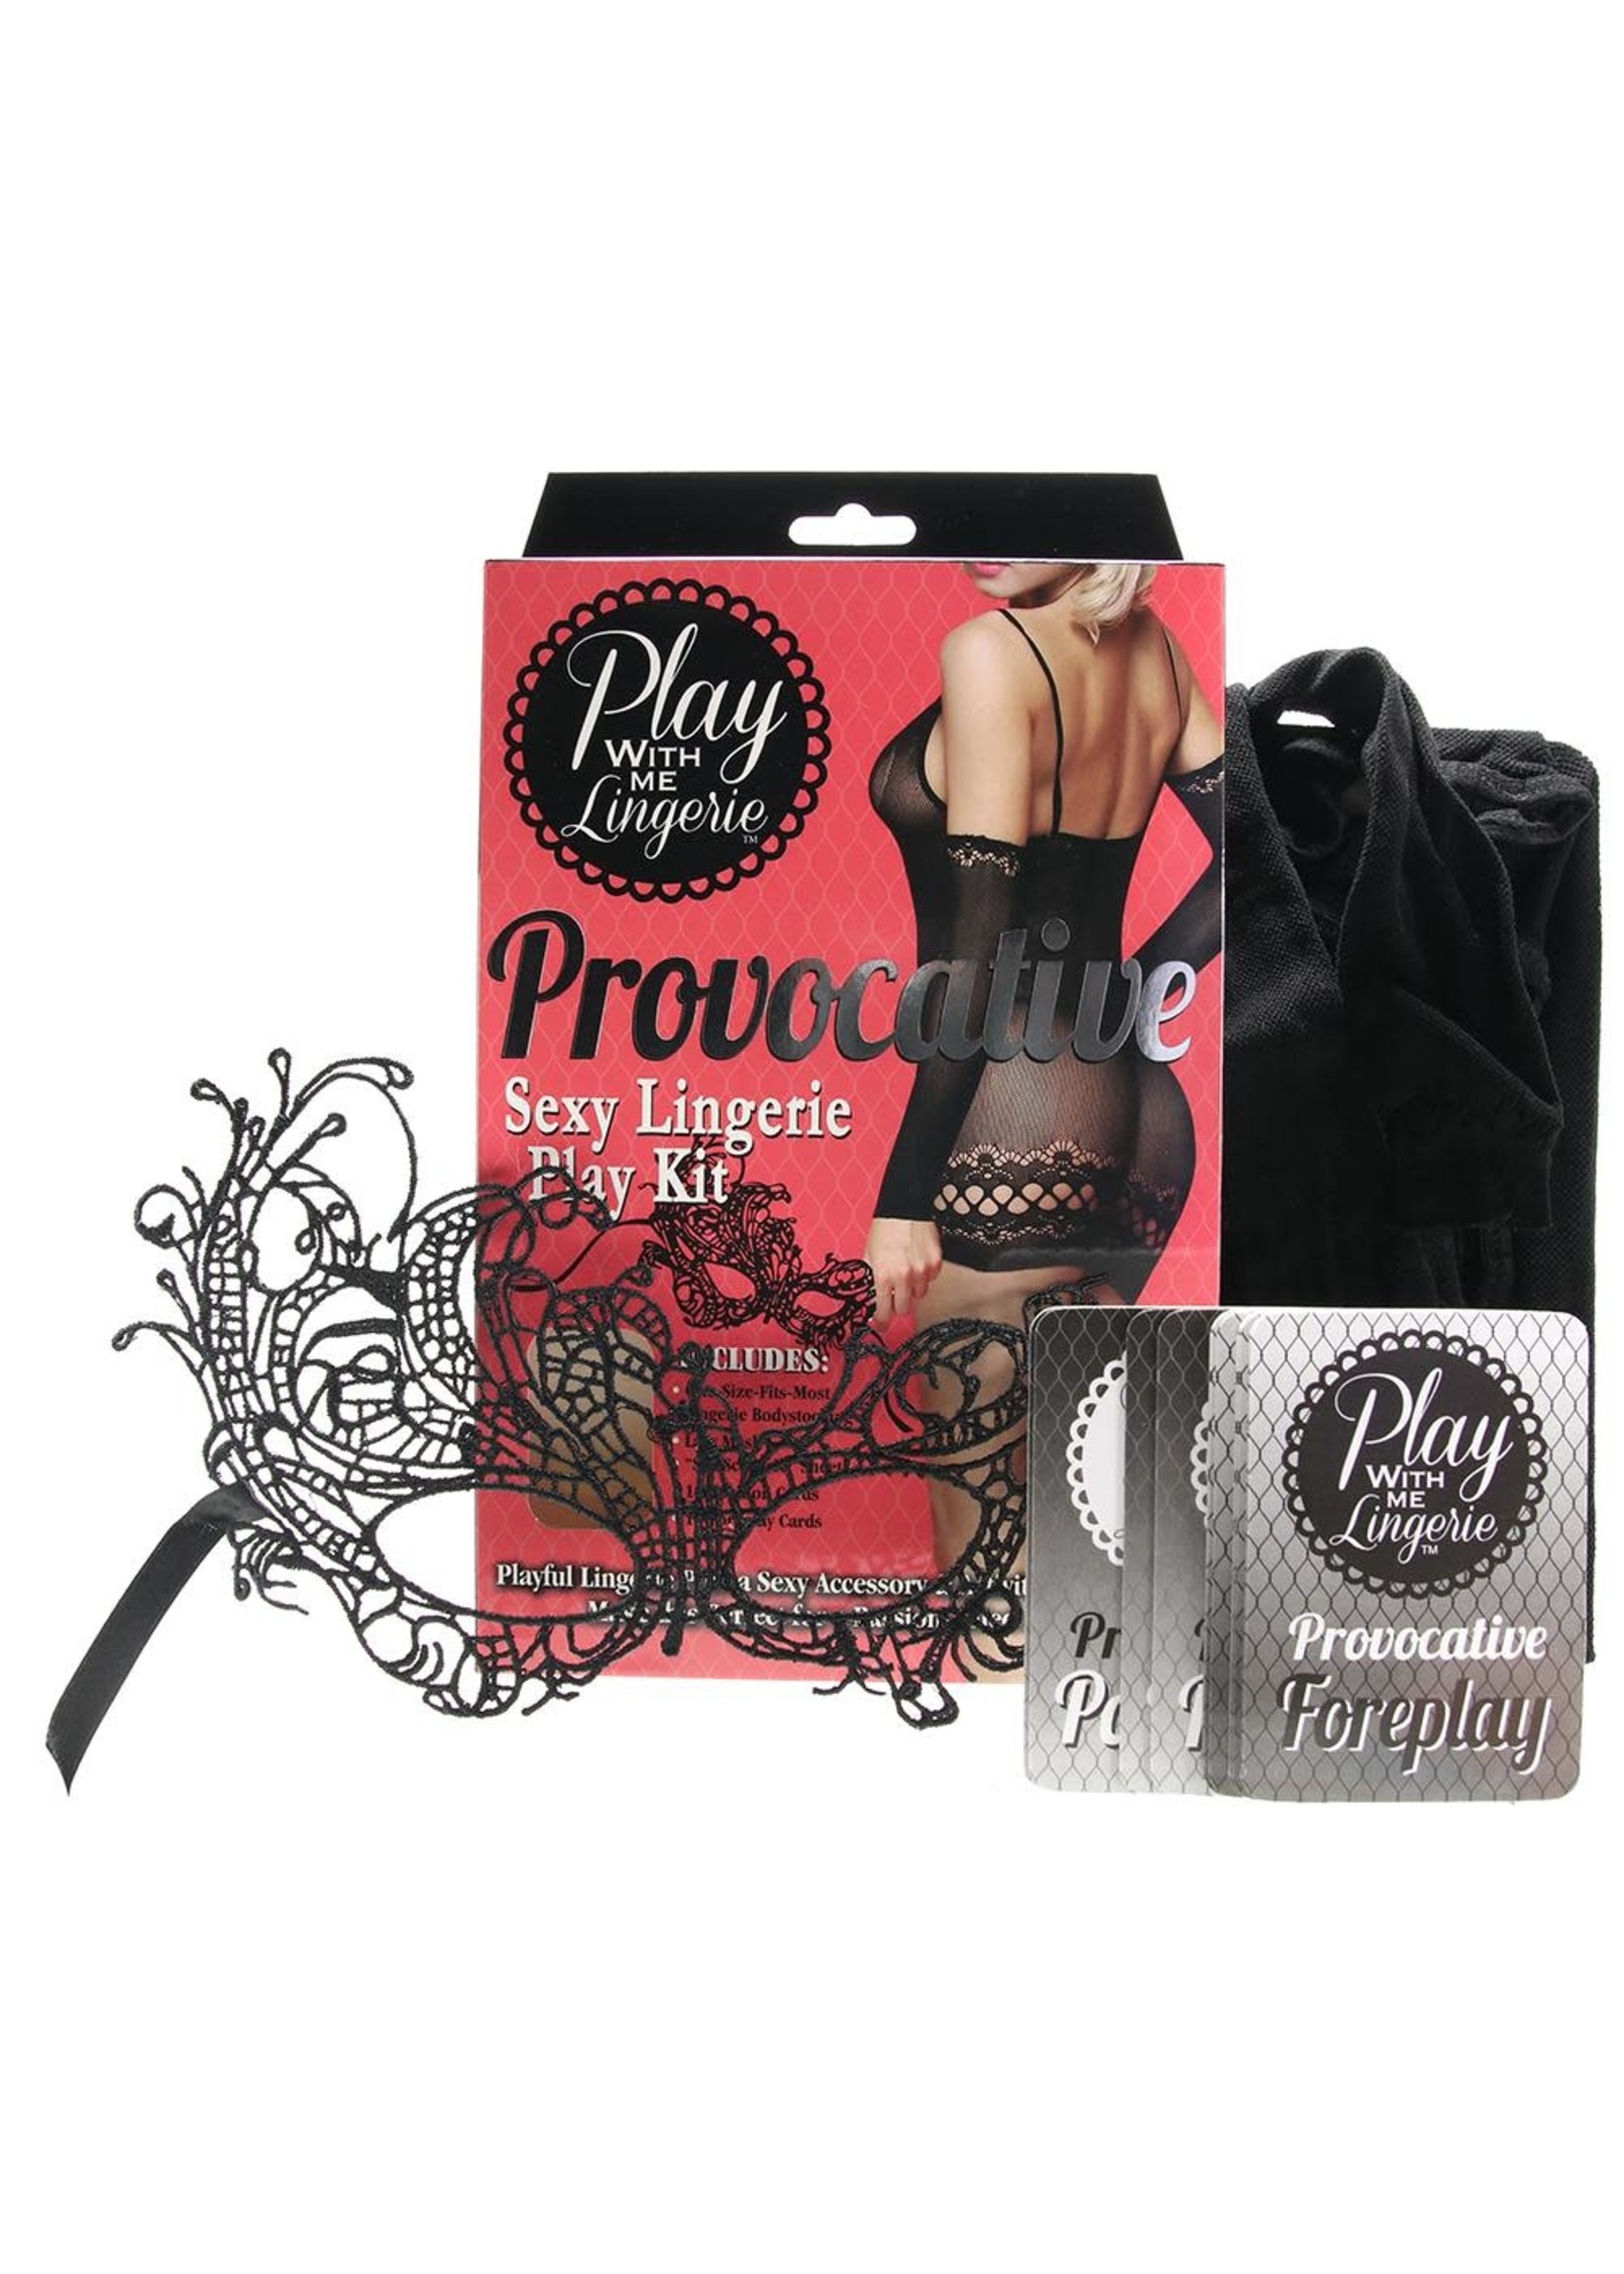 Play With Me Lingerie Provocative Sexy Play Kit